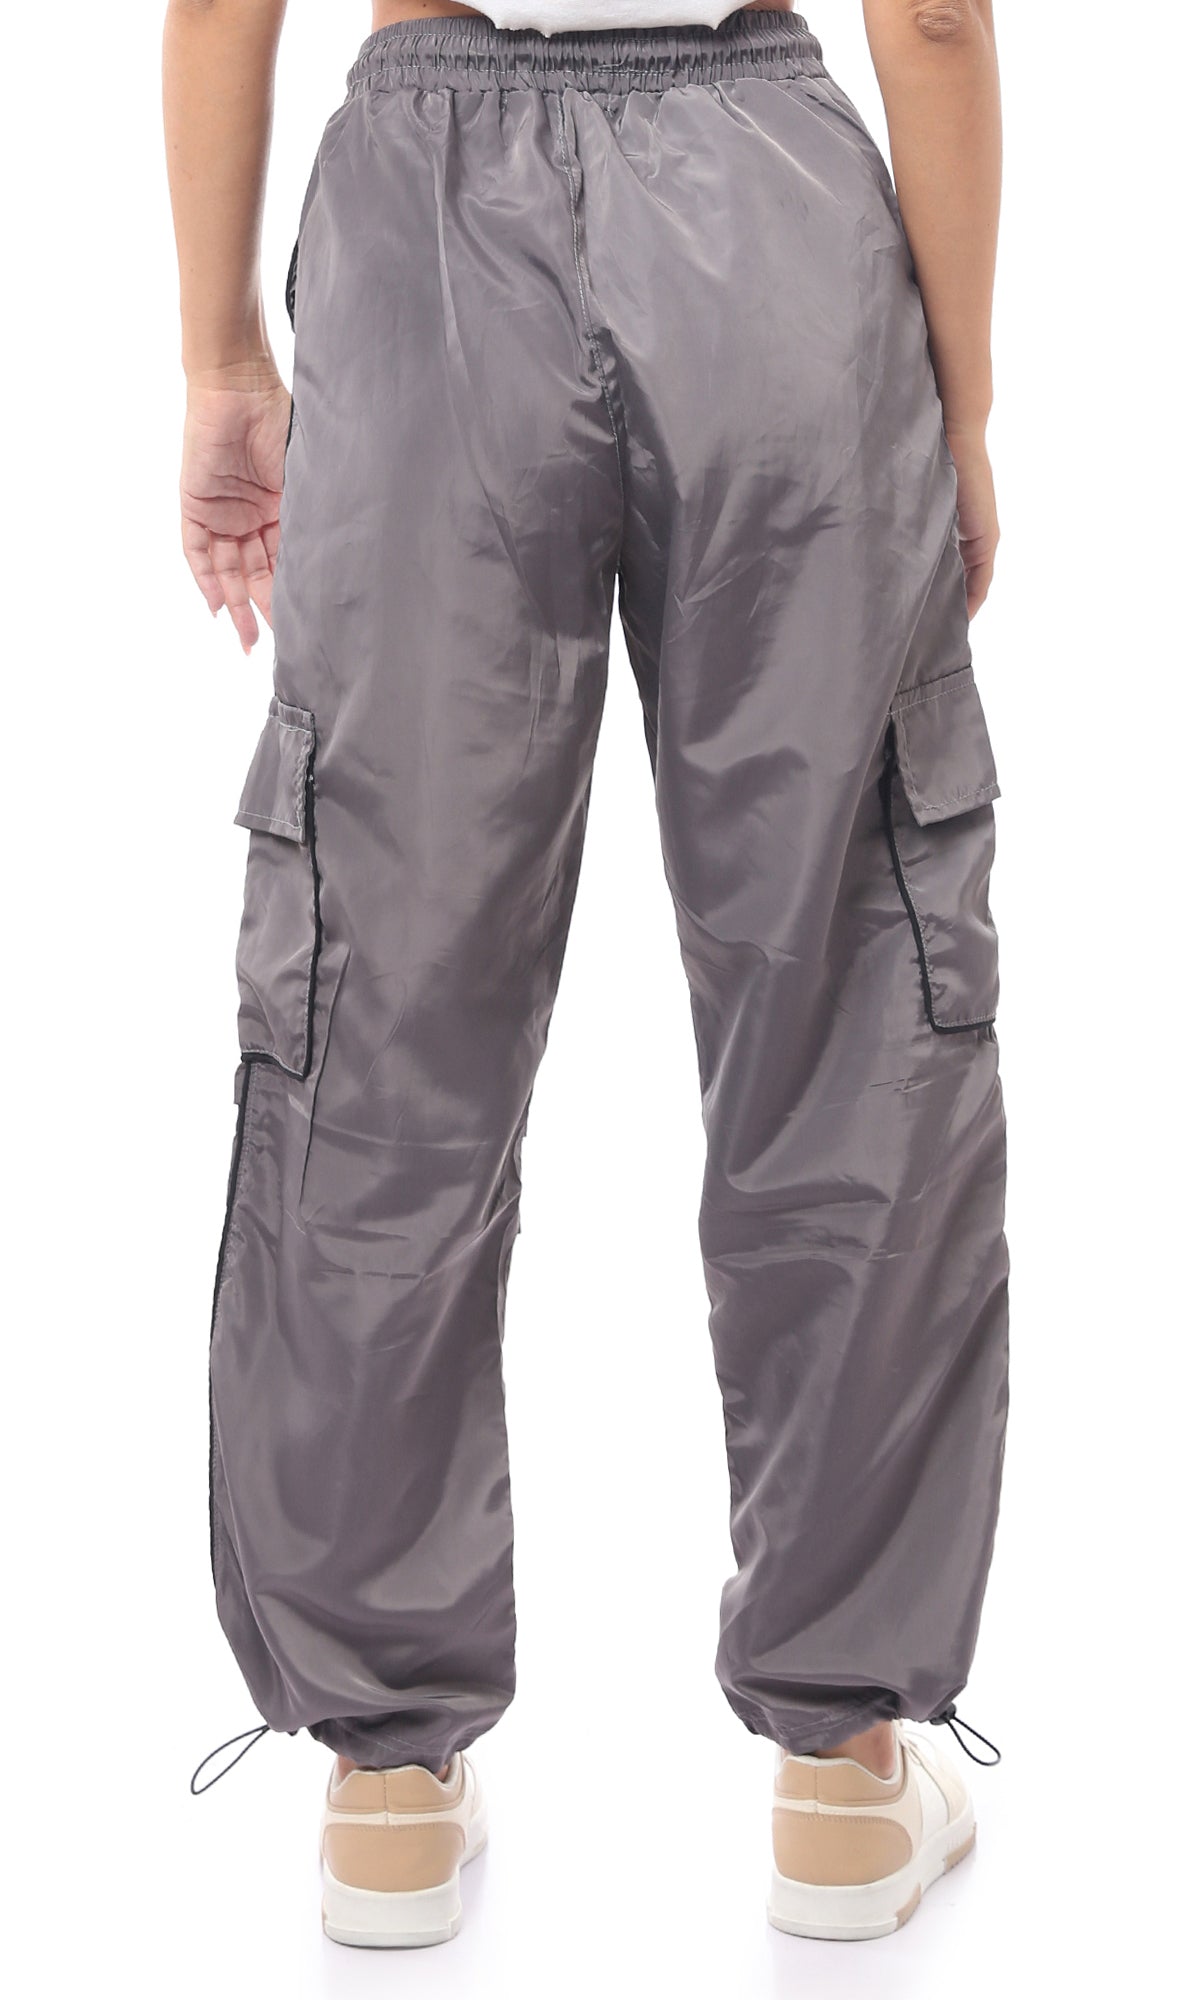 O170607 Grey Slip On Reflective Trousers With Elastic Waist